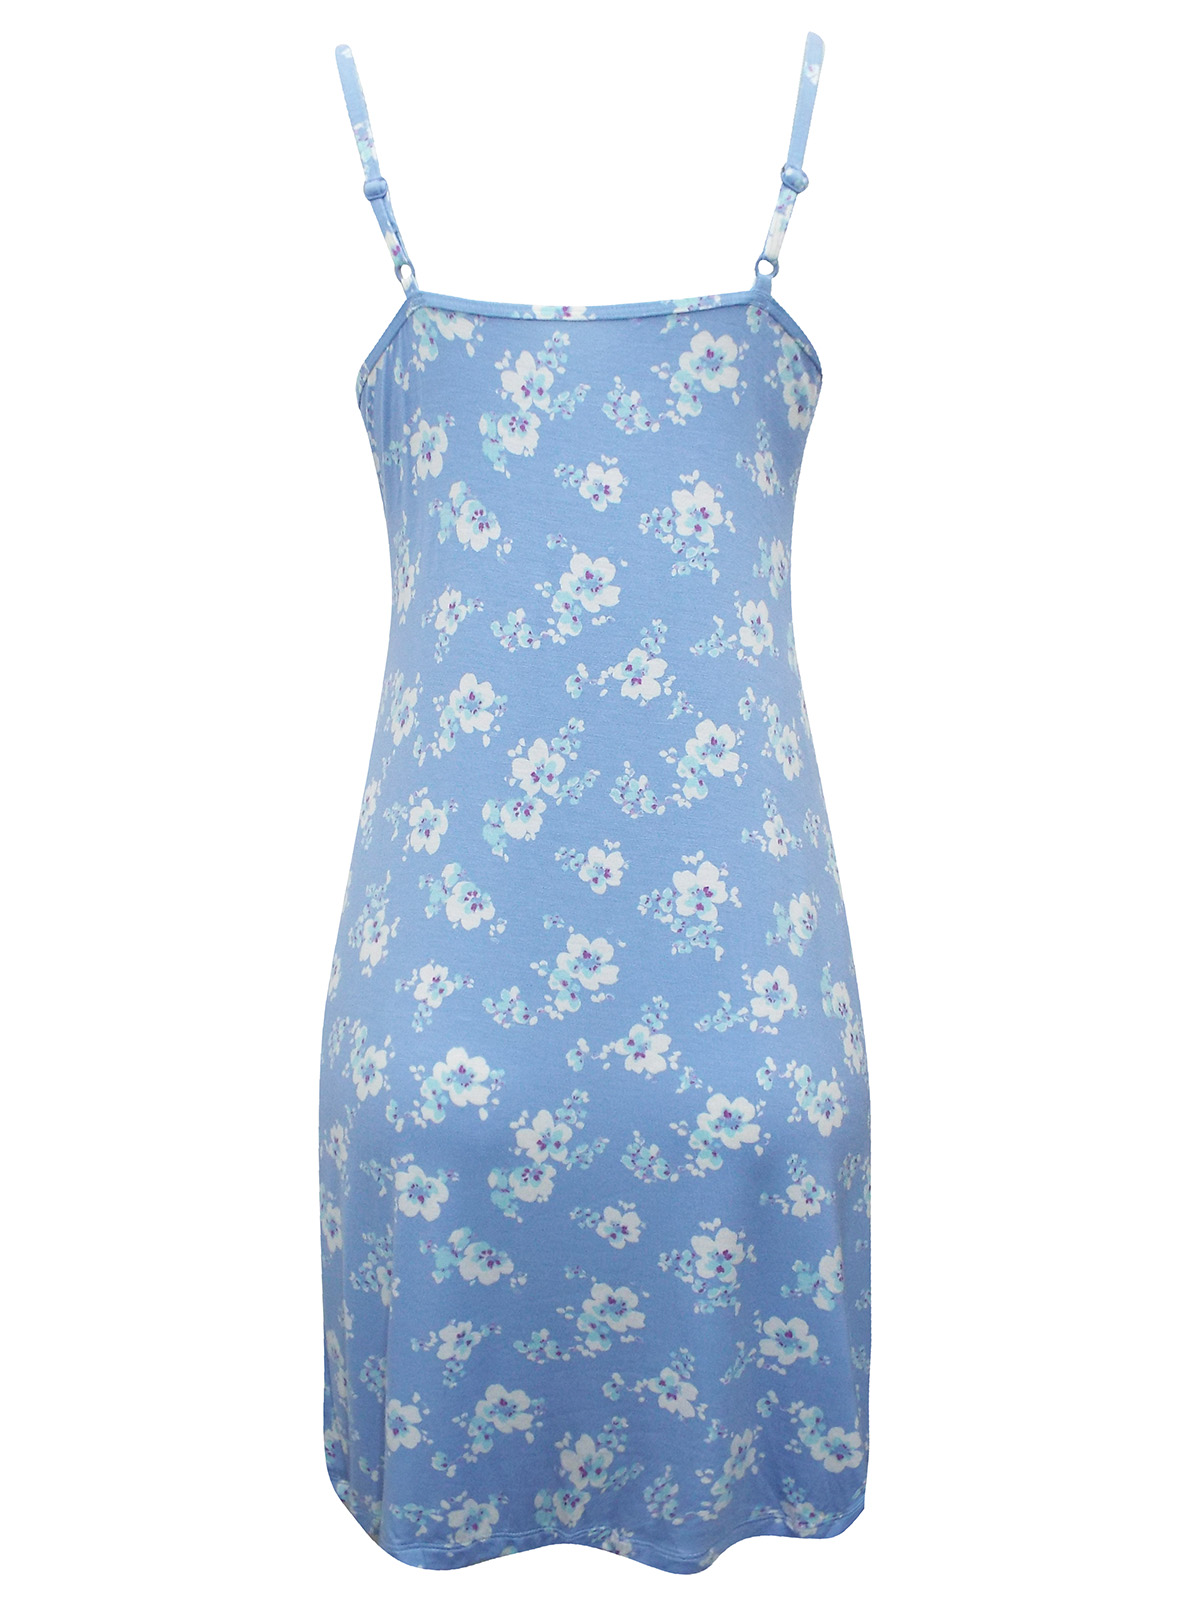 Marks and Spencer - - M&5 BLUE Floral Print Chemise - Size 8 to 14